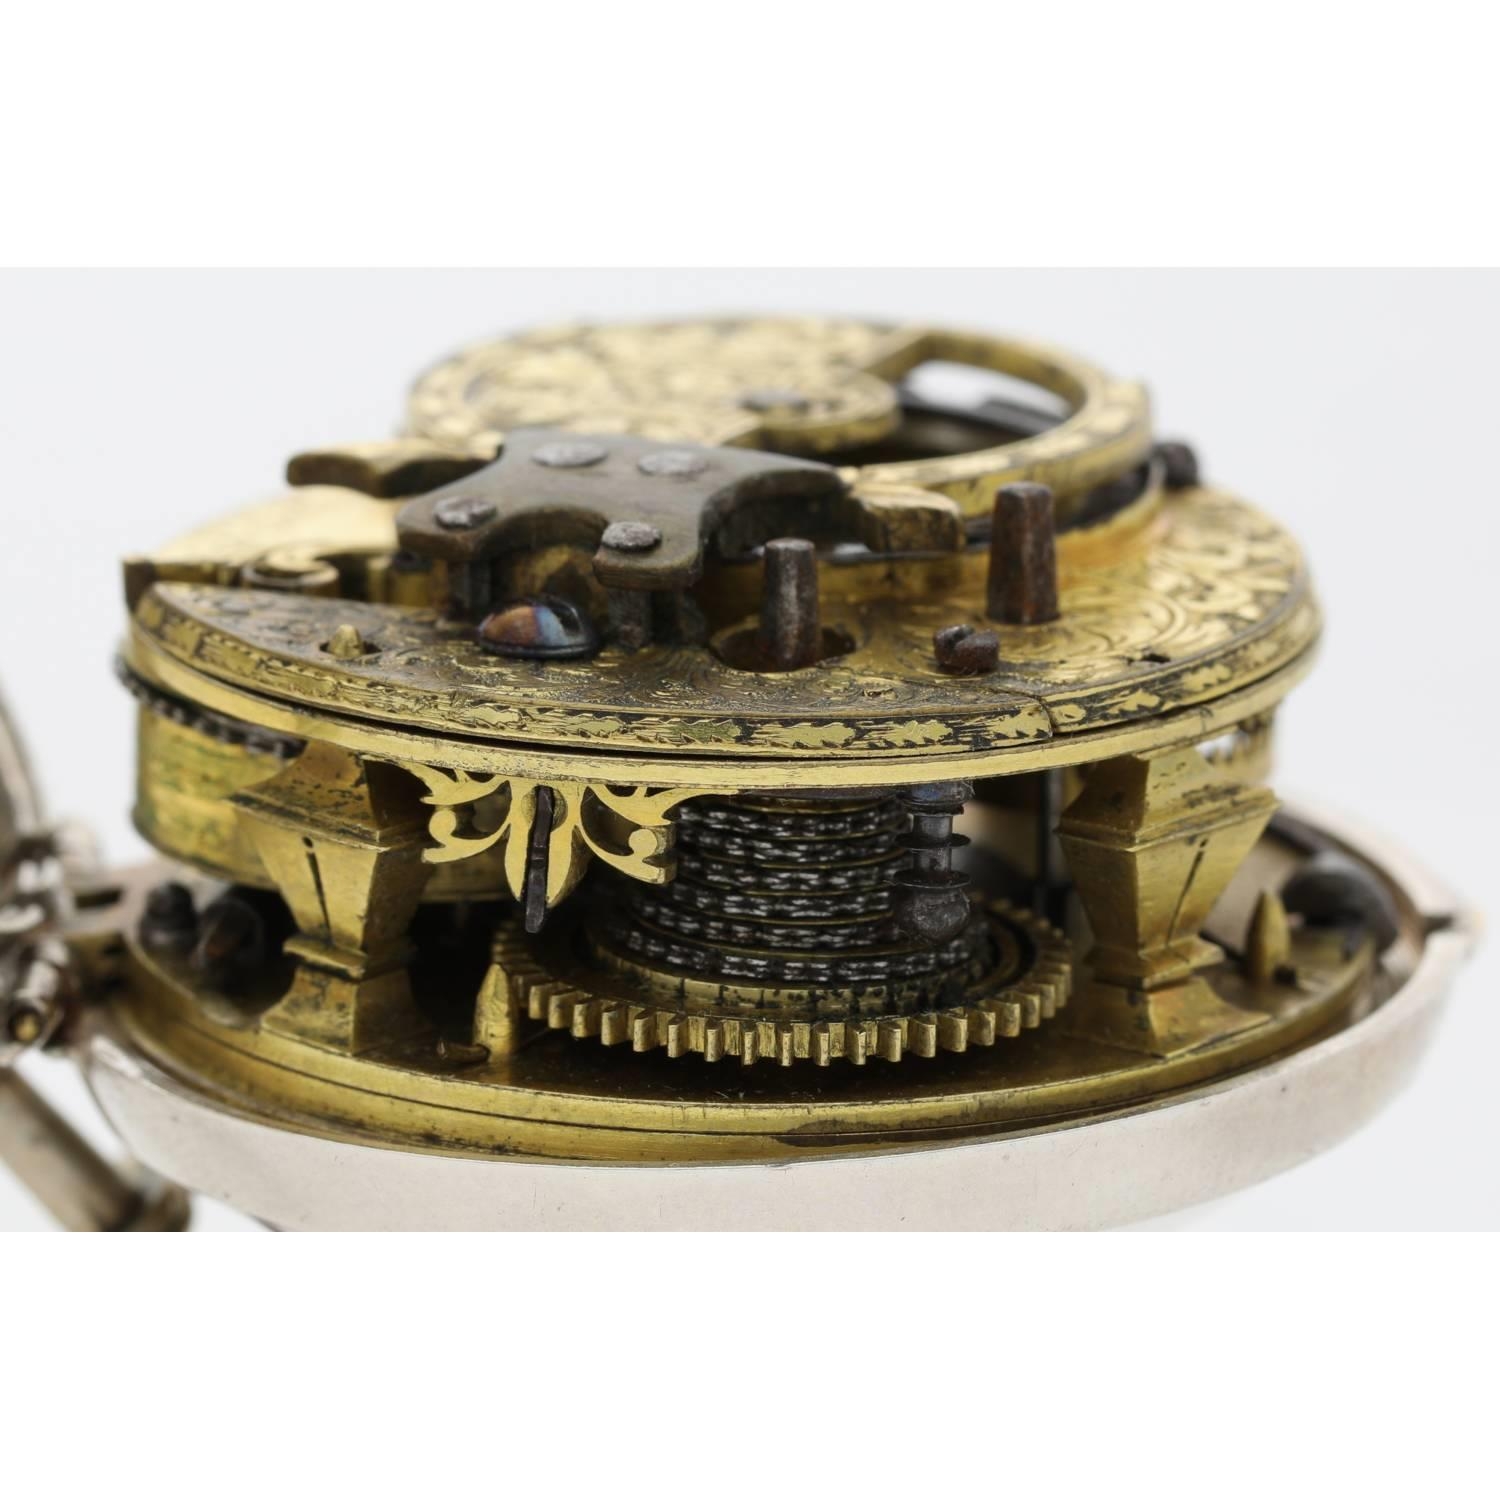 Gorsuch, Salop - English early 18th century silver 'mock pendulum' verge pocket watch, signed deep - Image 4 of 7